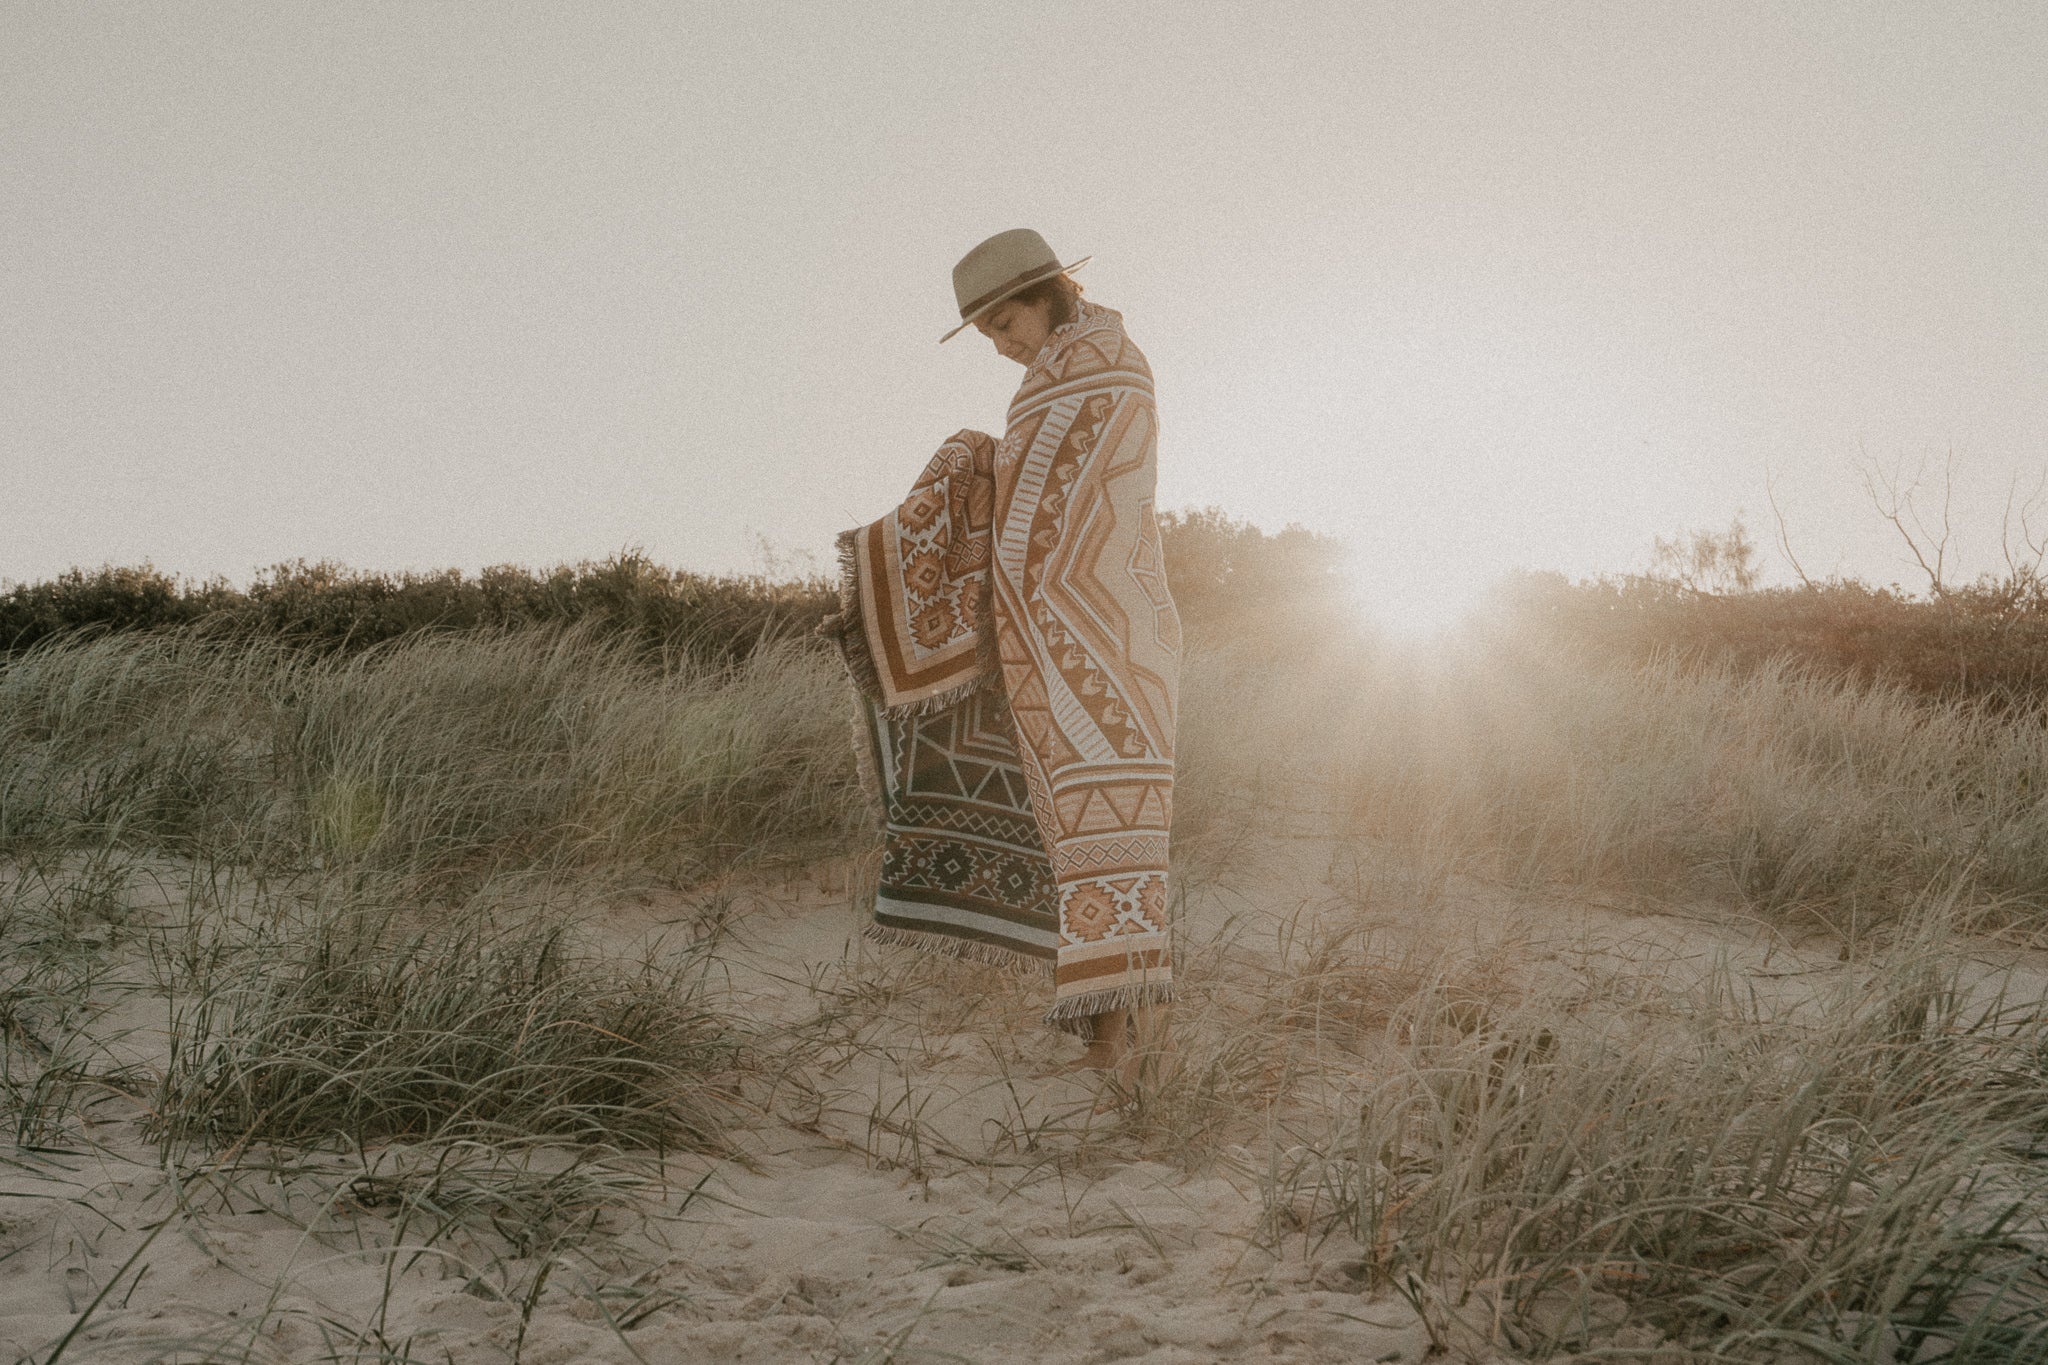 Girl standing in sand Dunes with throw rug wrapped around her